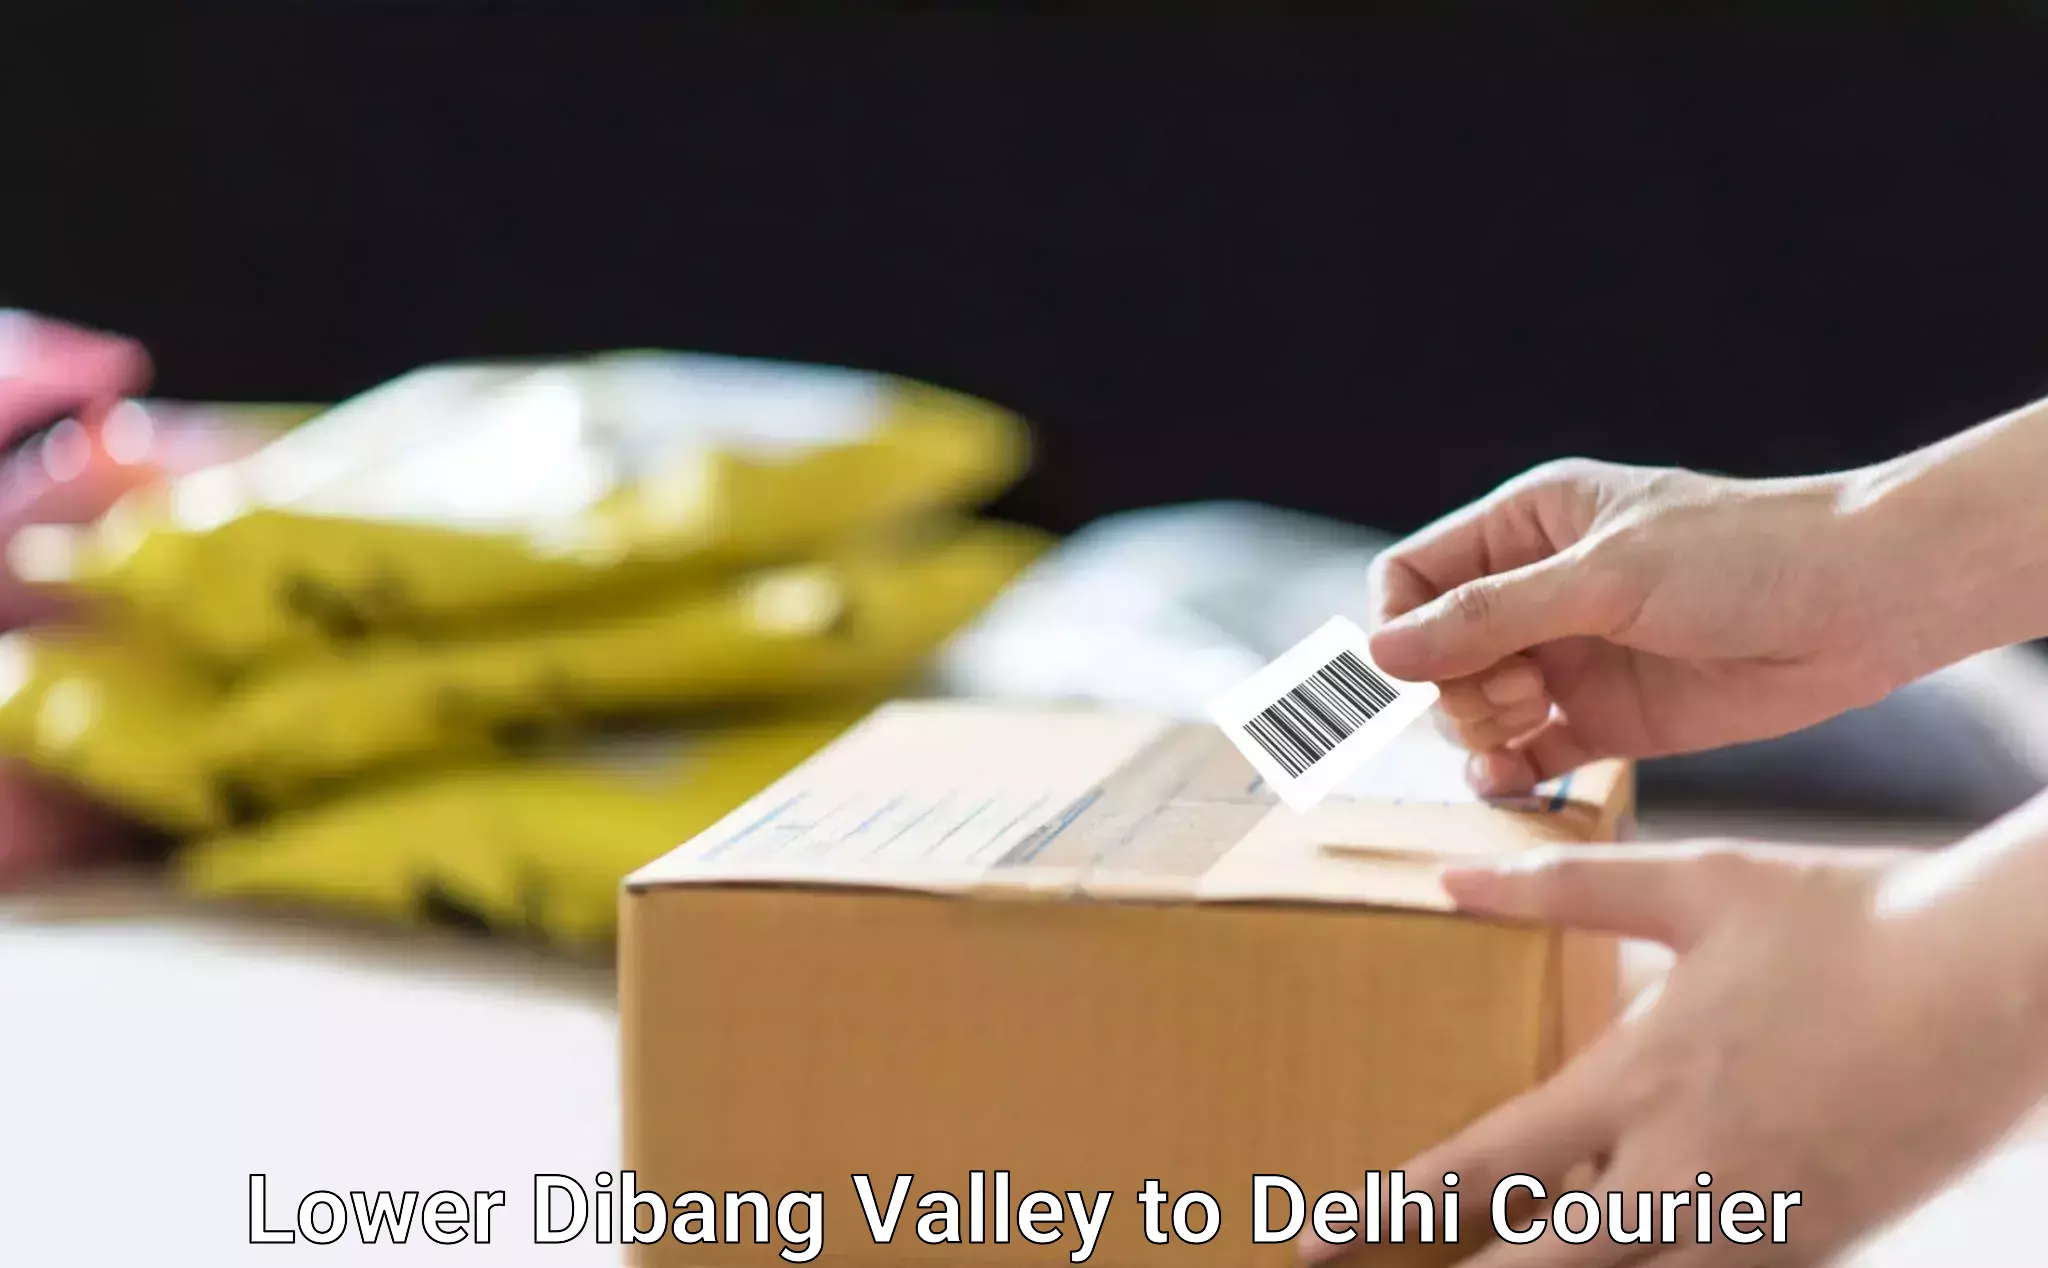 Local delivery service Lower Dibang Valley to Krishna Nagar